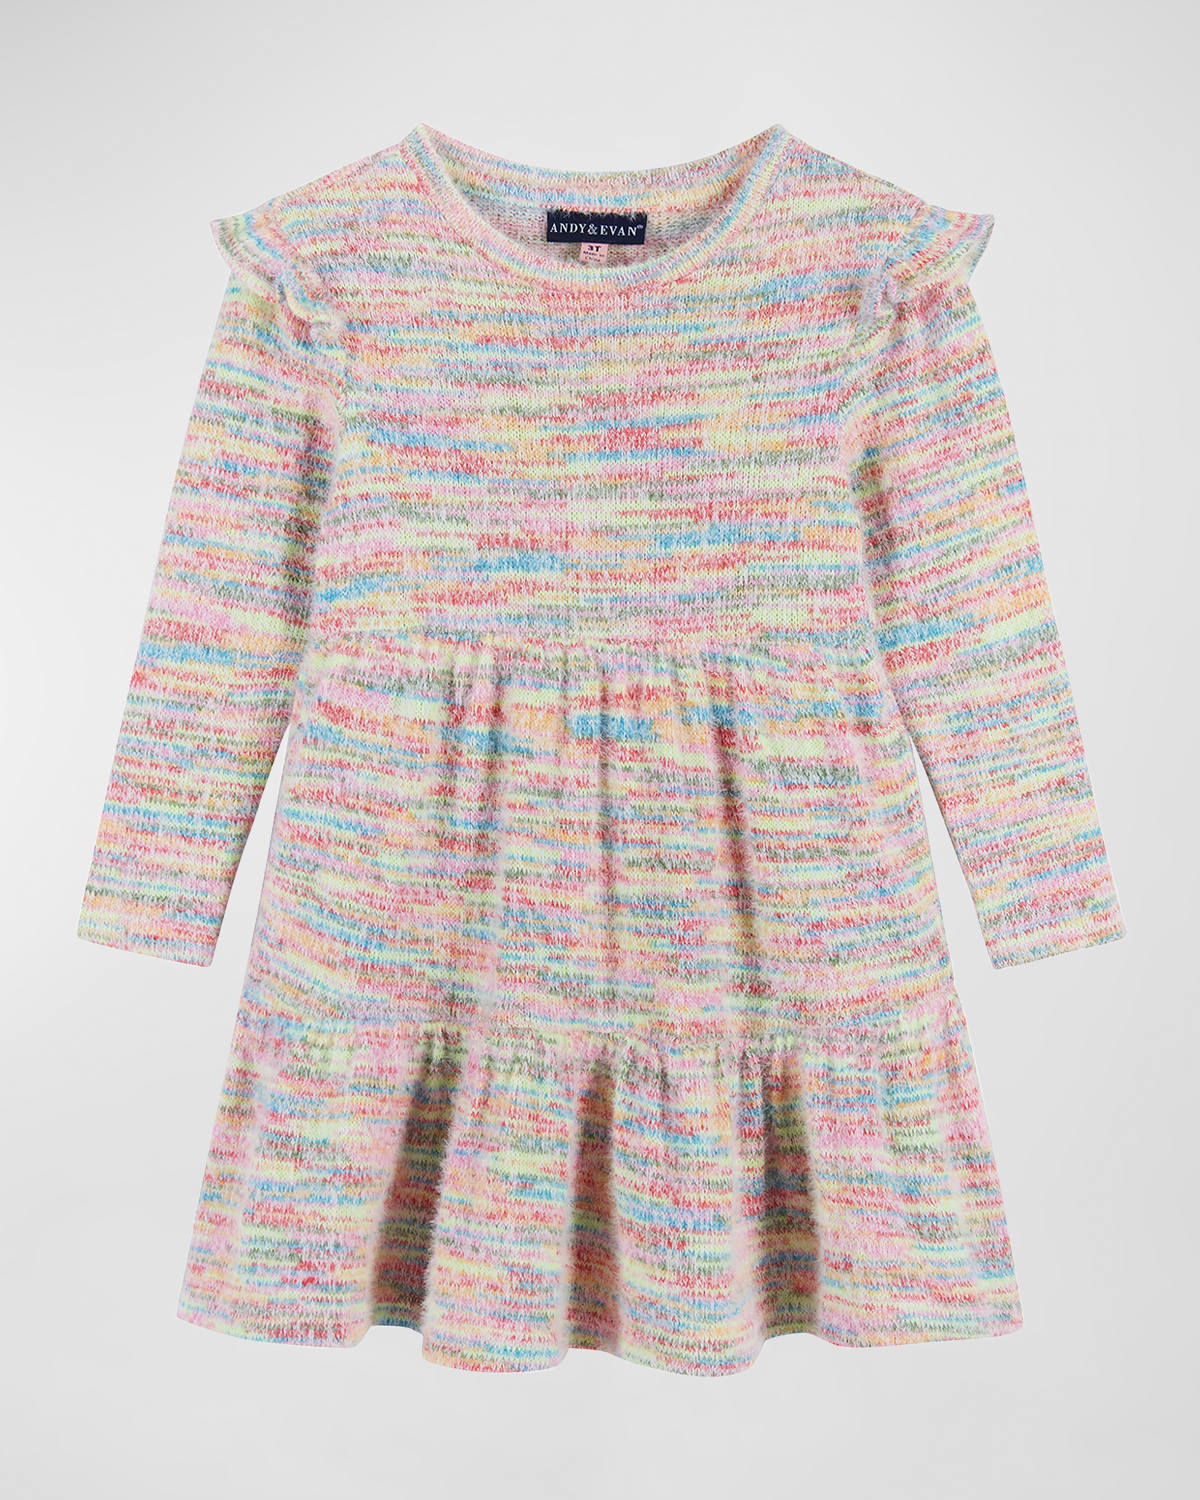 ANDY & EVAN GIRL'S MULTICOLOR KNIT RUFFLE TRIM DRESS